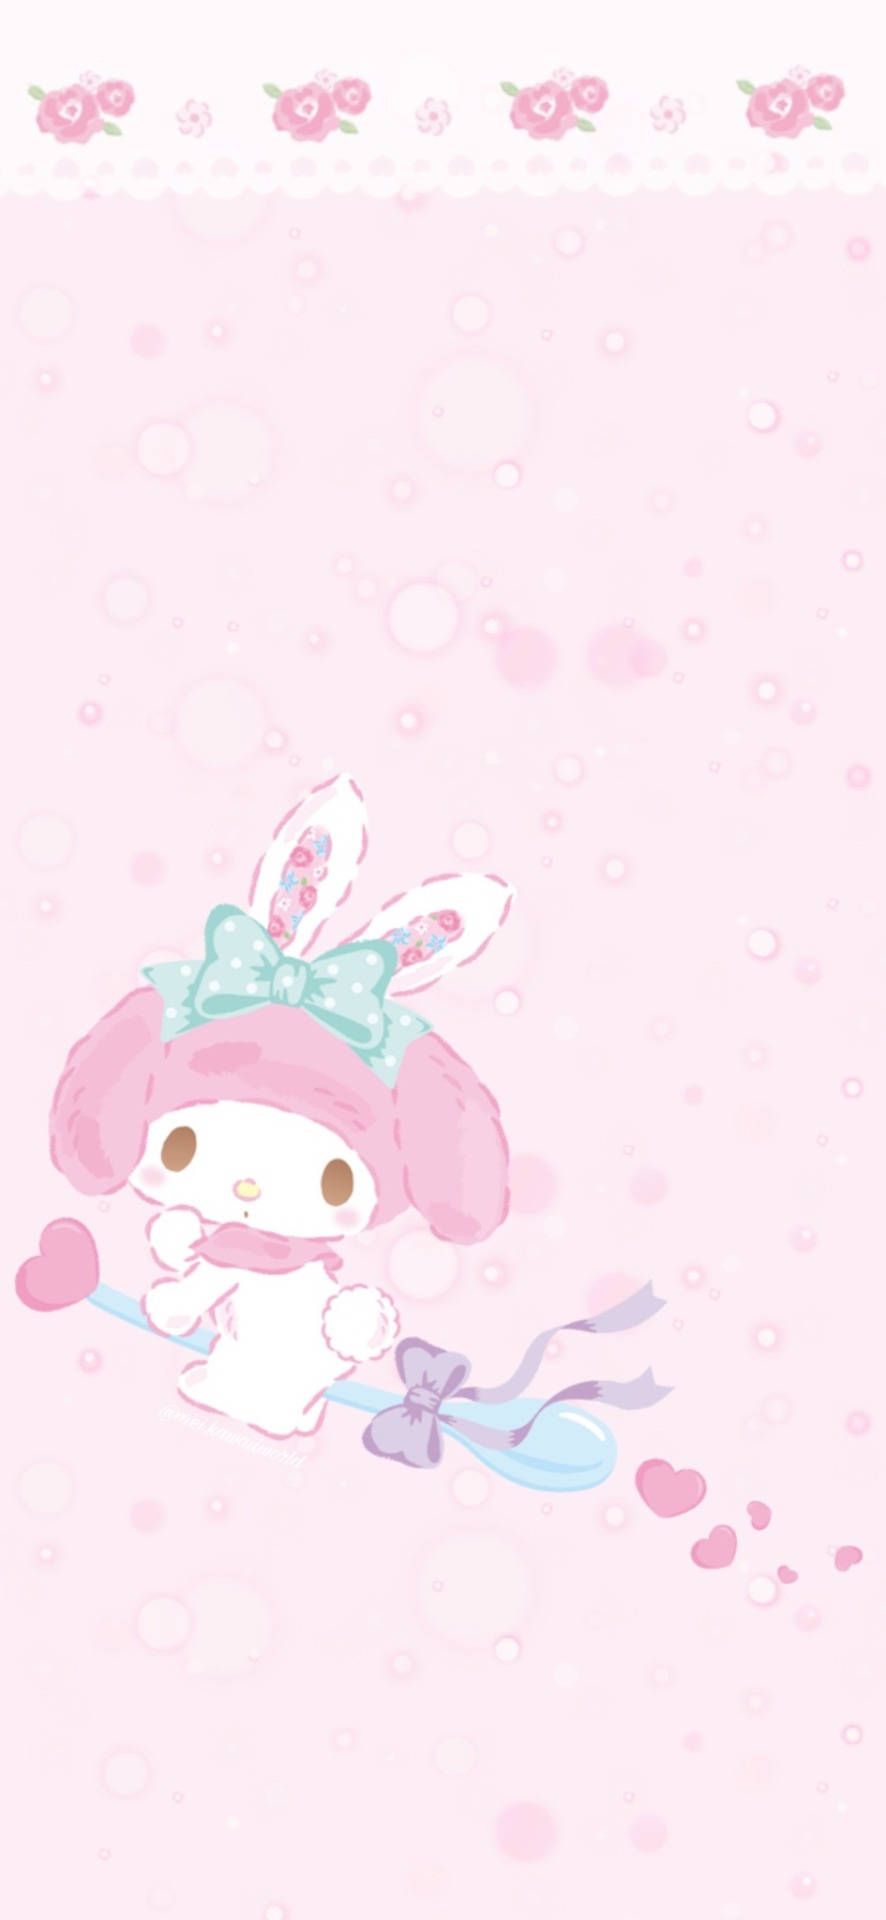 My Melody Riding A Spoon